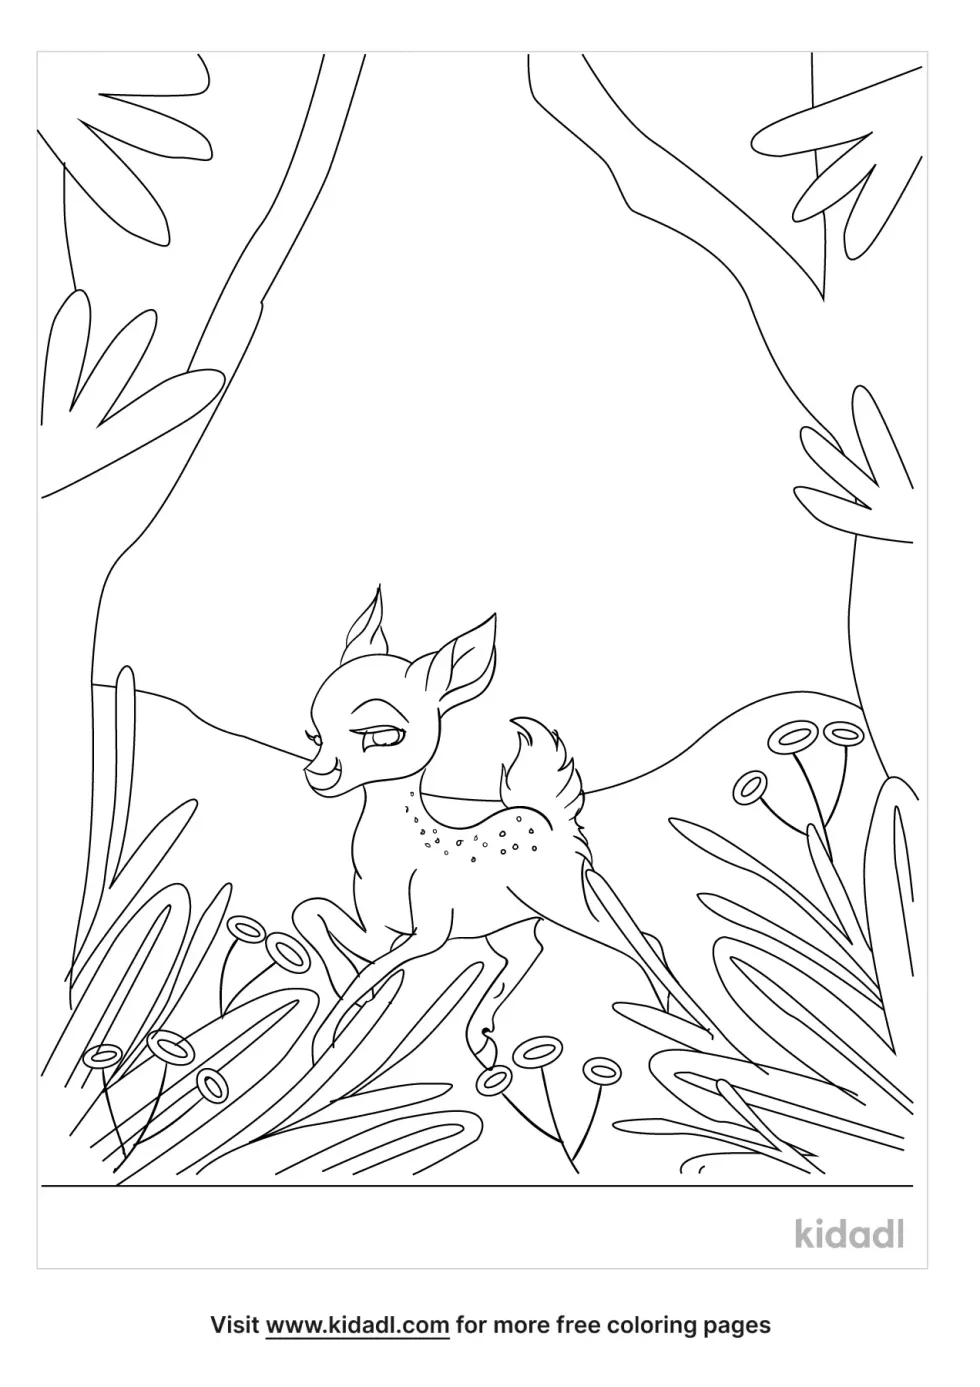 Storybook Coloring Page